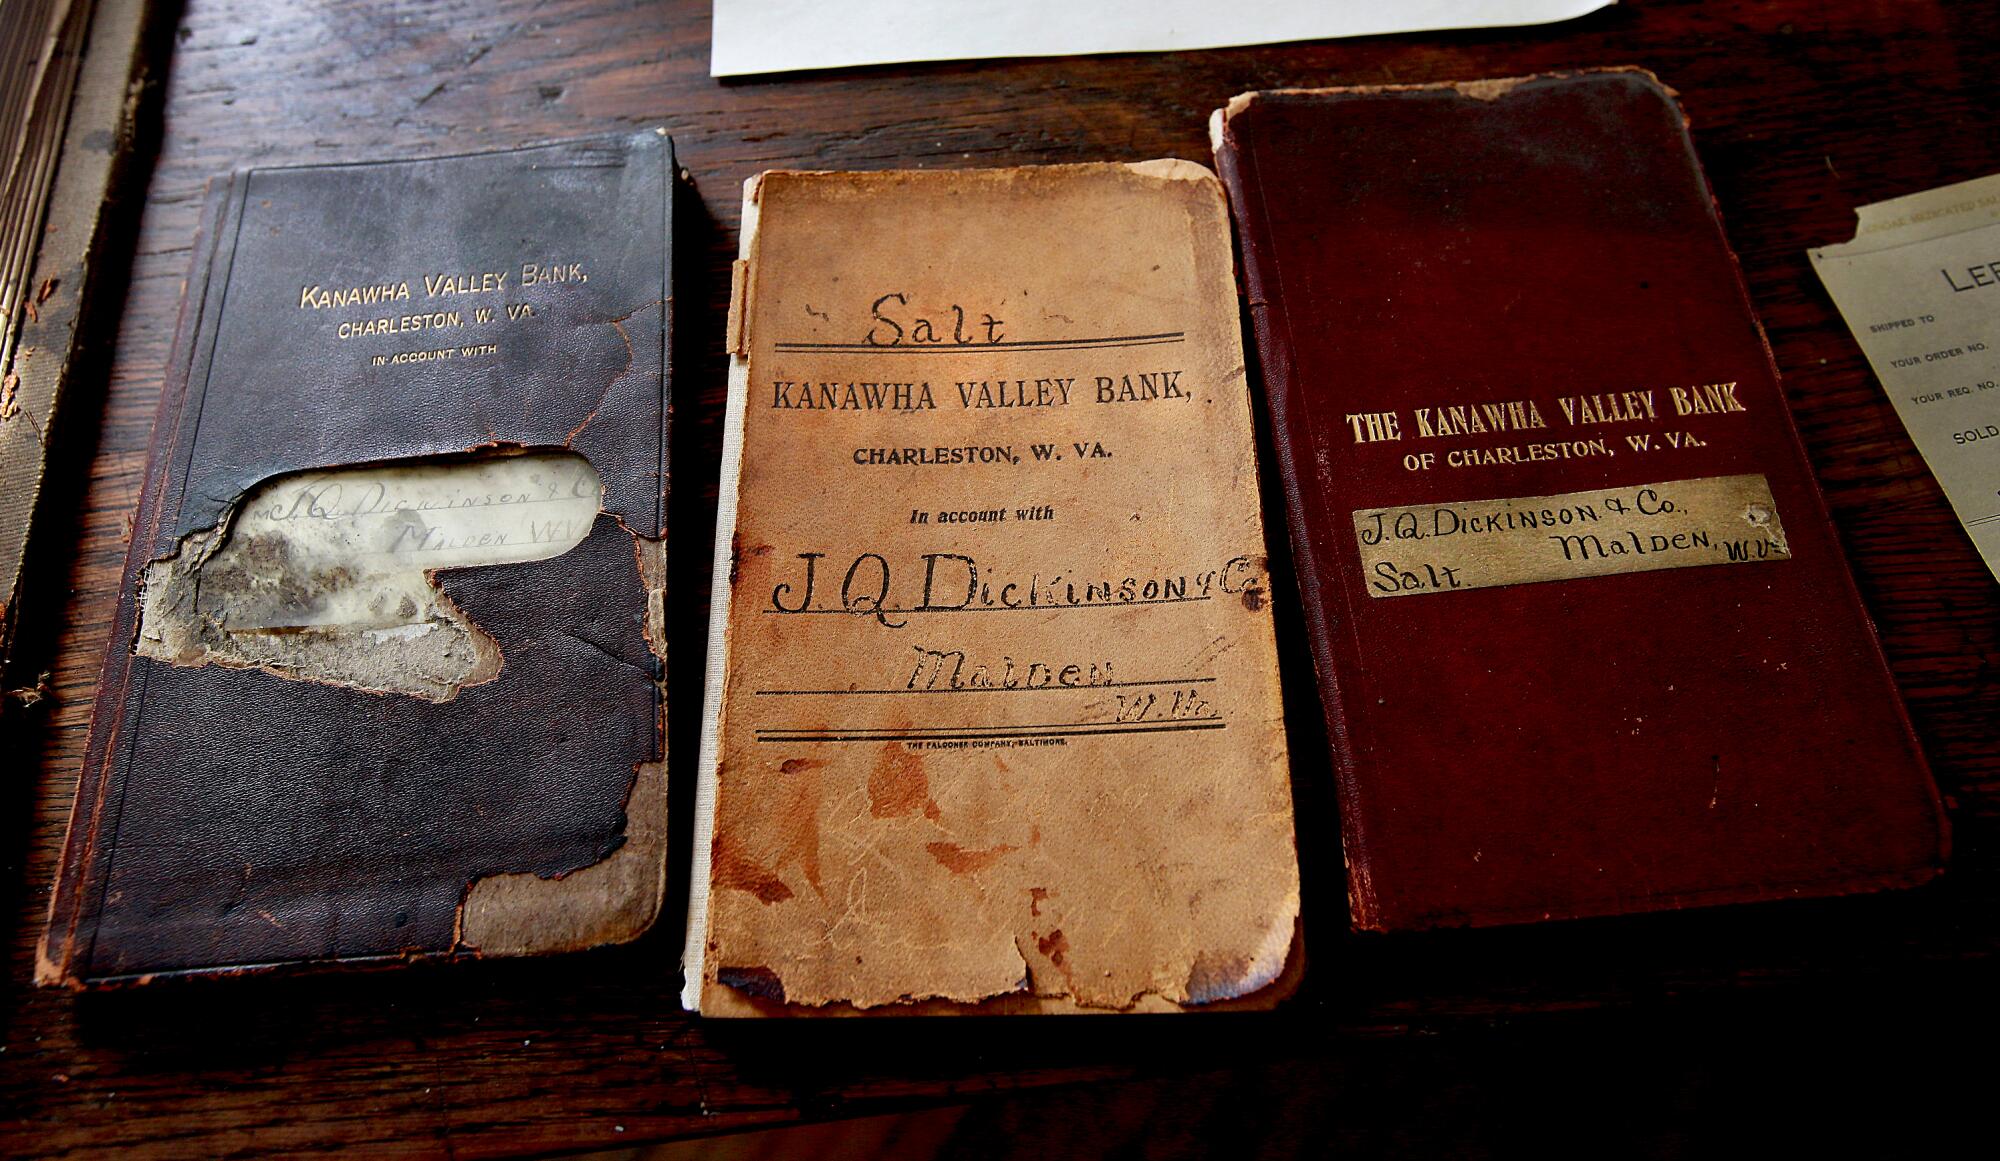 Old bank deposit books at J.Q. Dickinson, the artisinal salt company that siblings Nancy Bruns and Lewis Payne opened in 2013 at the site of their ancestors' salt operation.